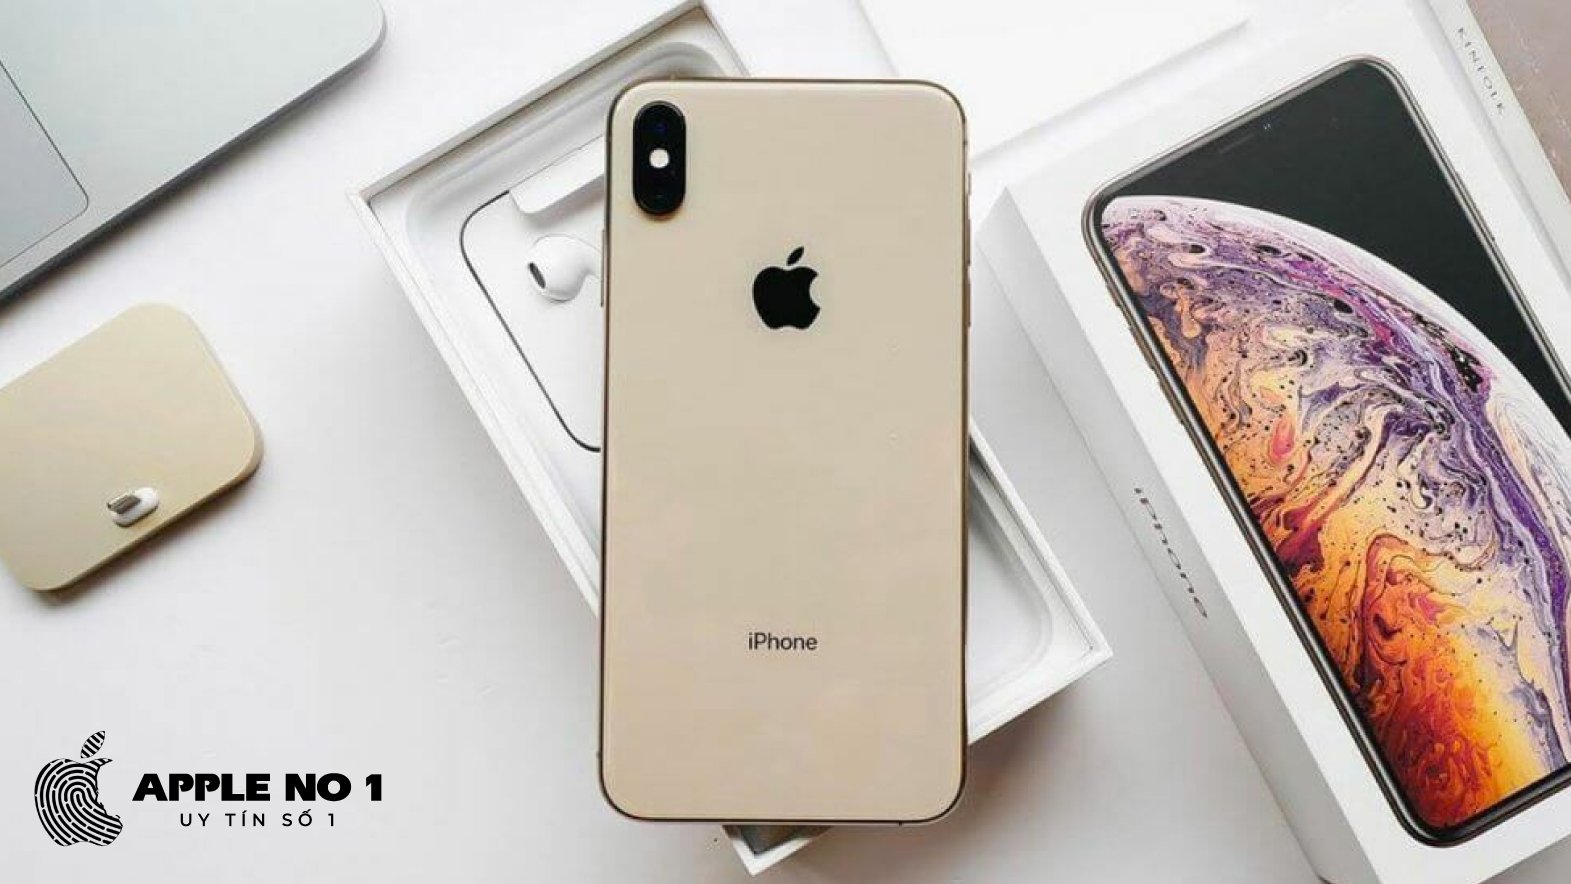 iphone xs max co man hinh rong 6.5 inch